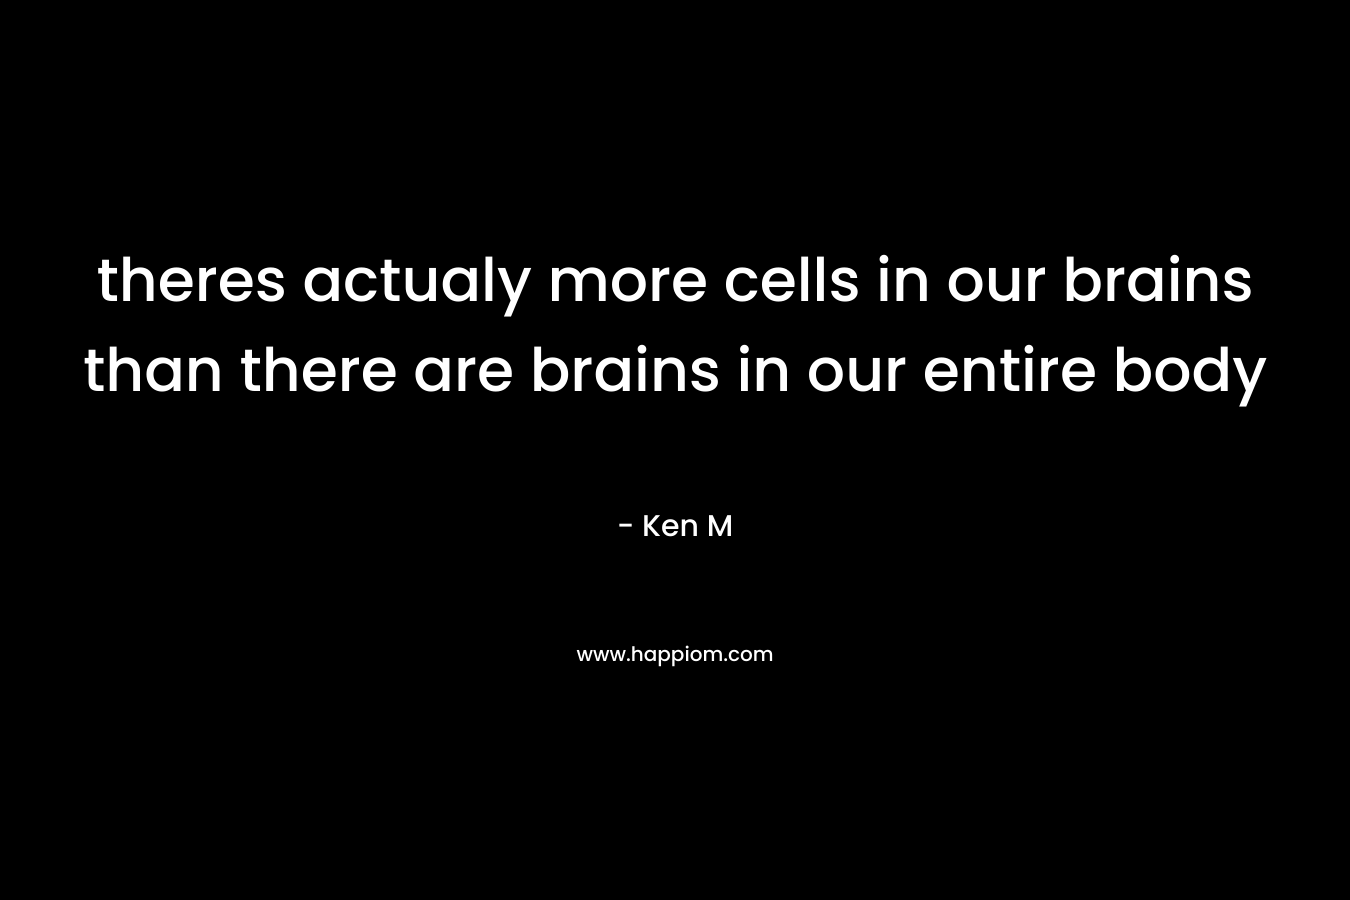 theres actualy more cells in our brains than there are brains in our entire body